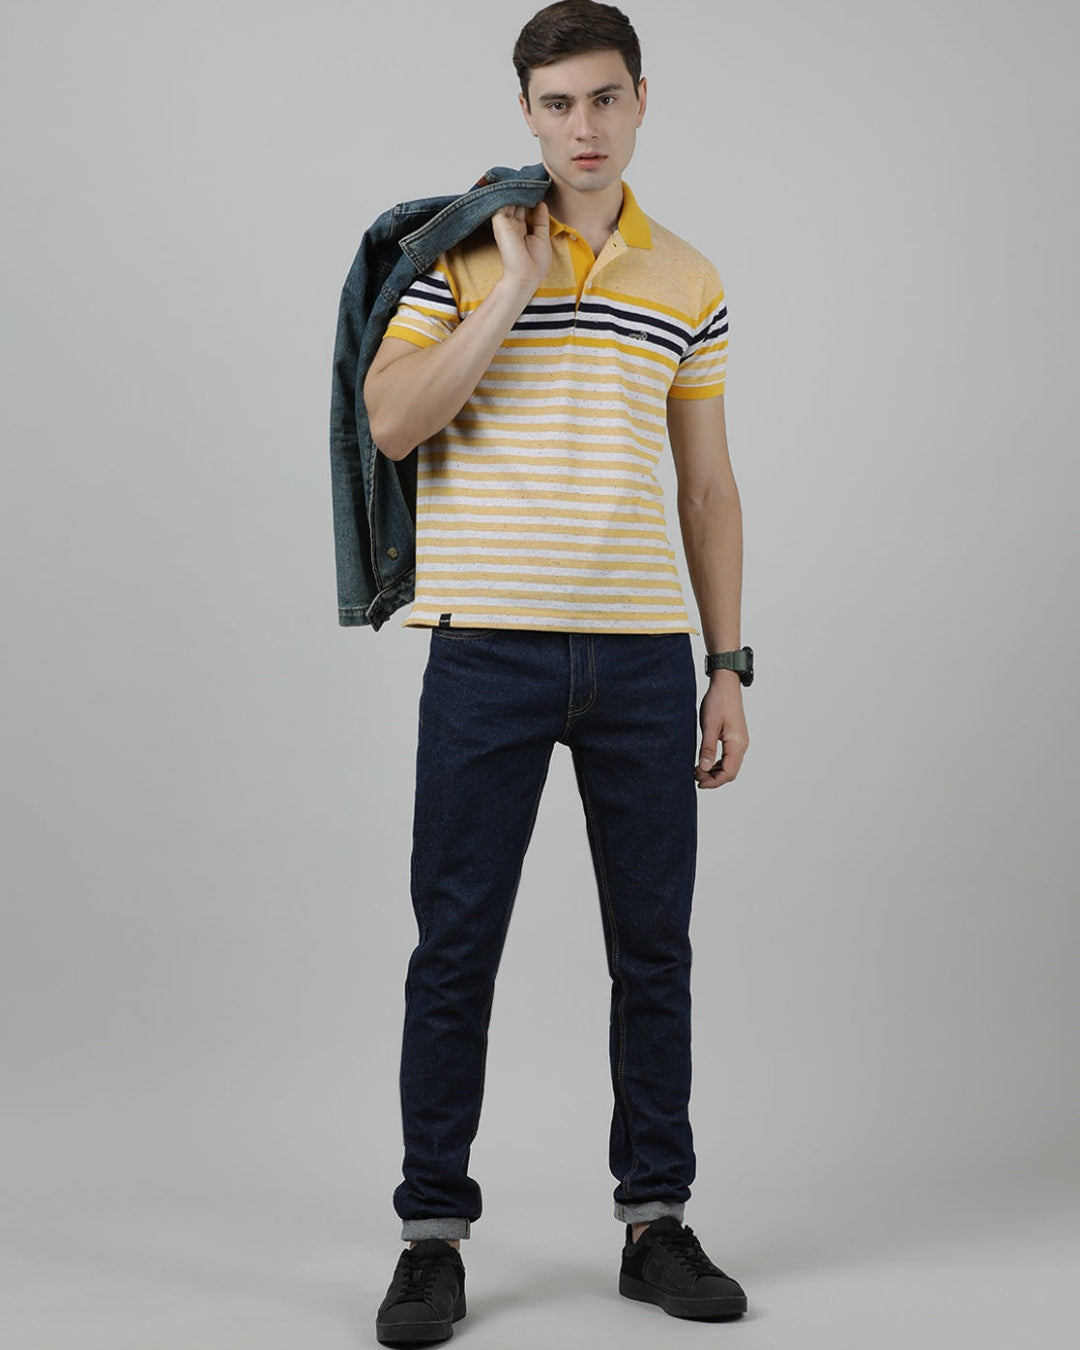 Crocodile Casual Yellow T-Shirt Engineering Stripes Half Sleeve Slim Fit with Collar for Men